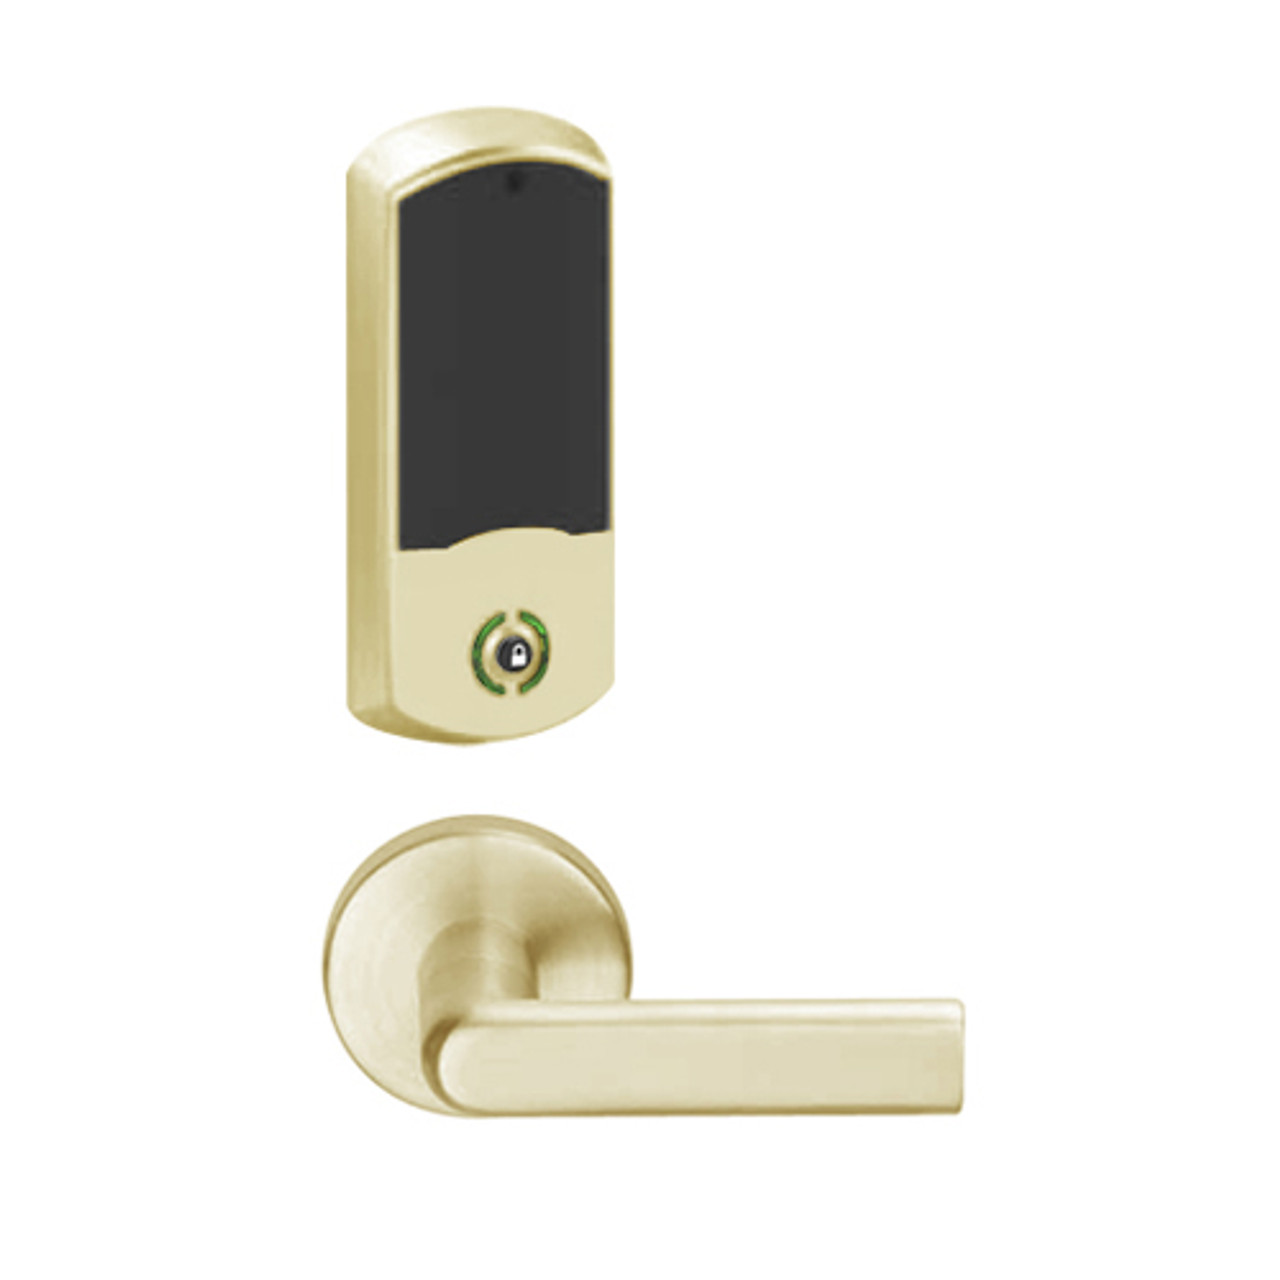 LEMB-GRW-J-01-606-00C Schlage Privacy/Office Wireless Greenwich Mortise Lock with Push Button & LED Indicator and 01 Lever Prepped for FSIC in Satin Brass